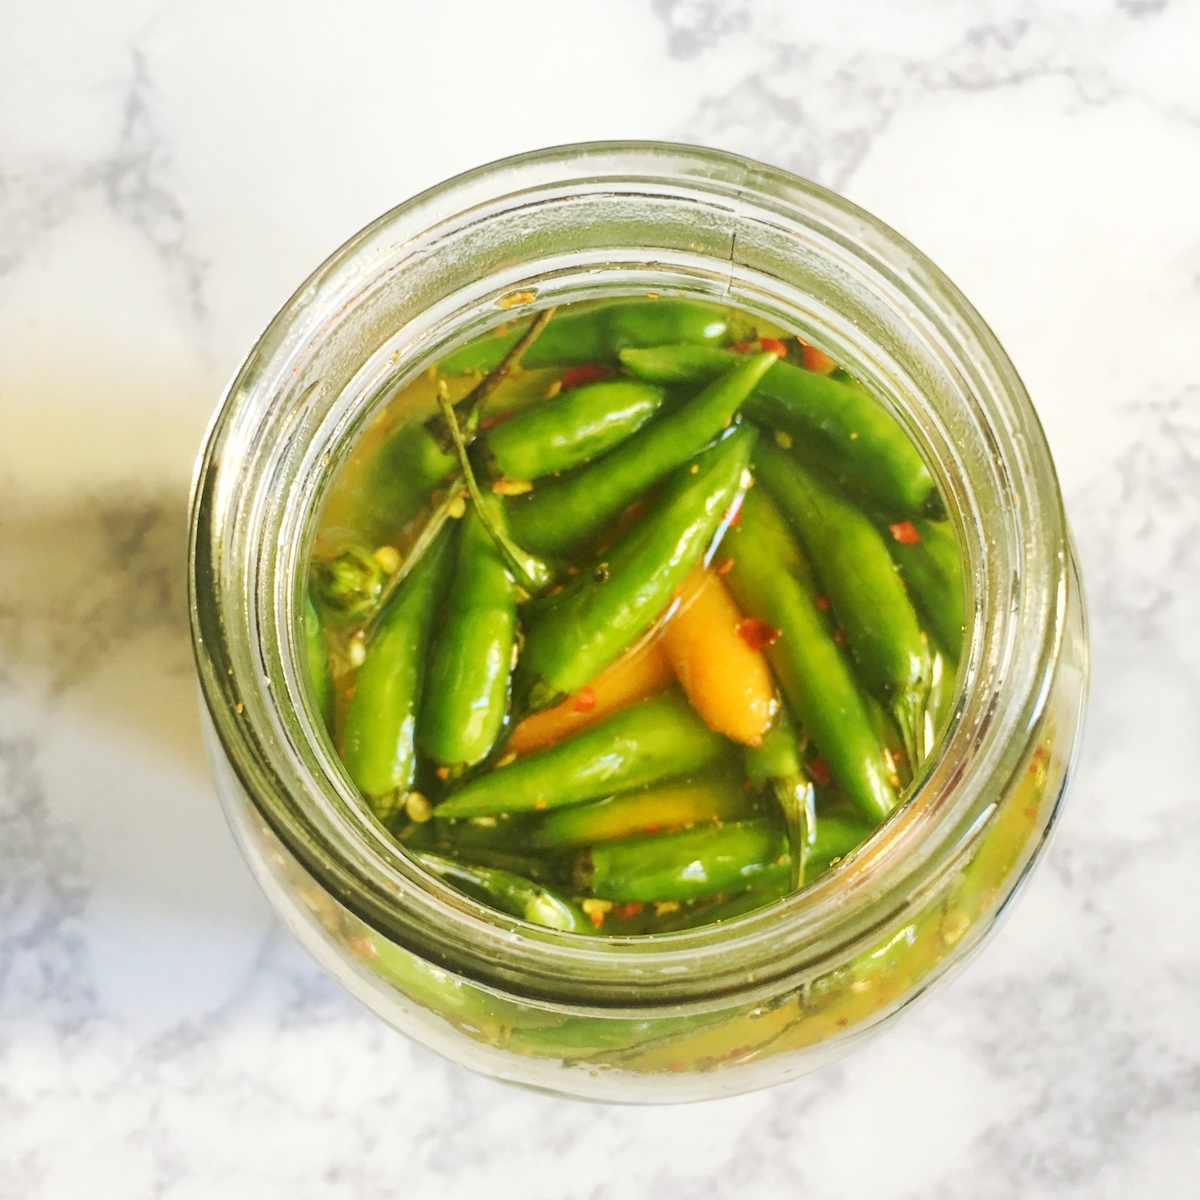 Pickling, a tradition that is good for your health!